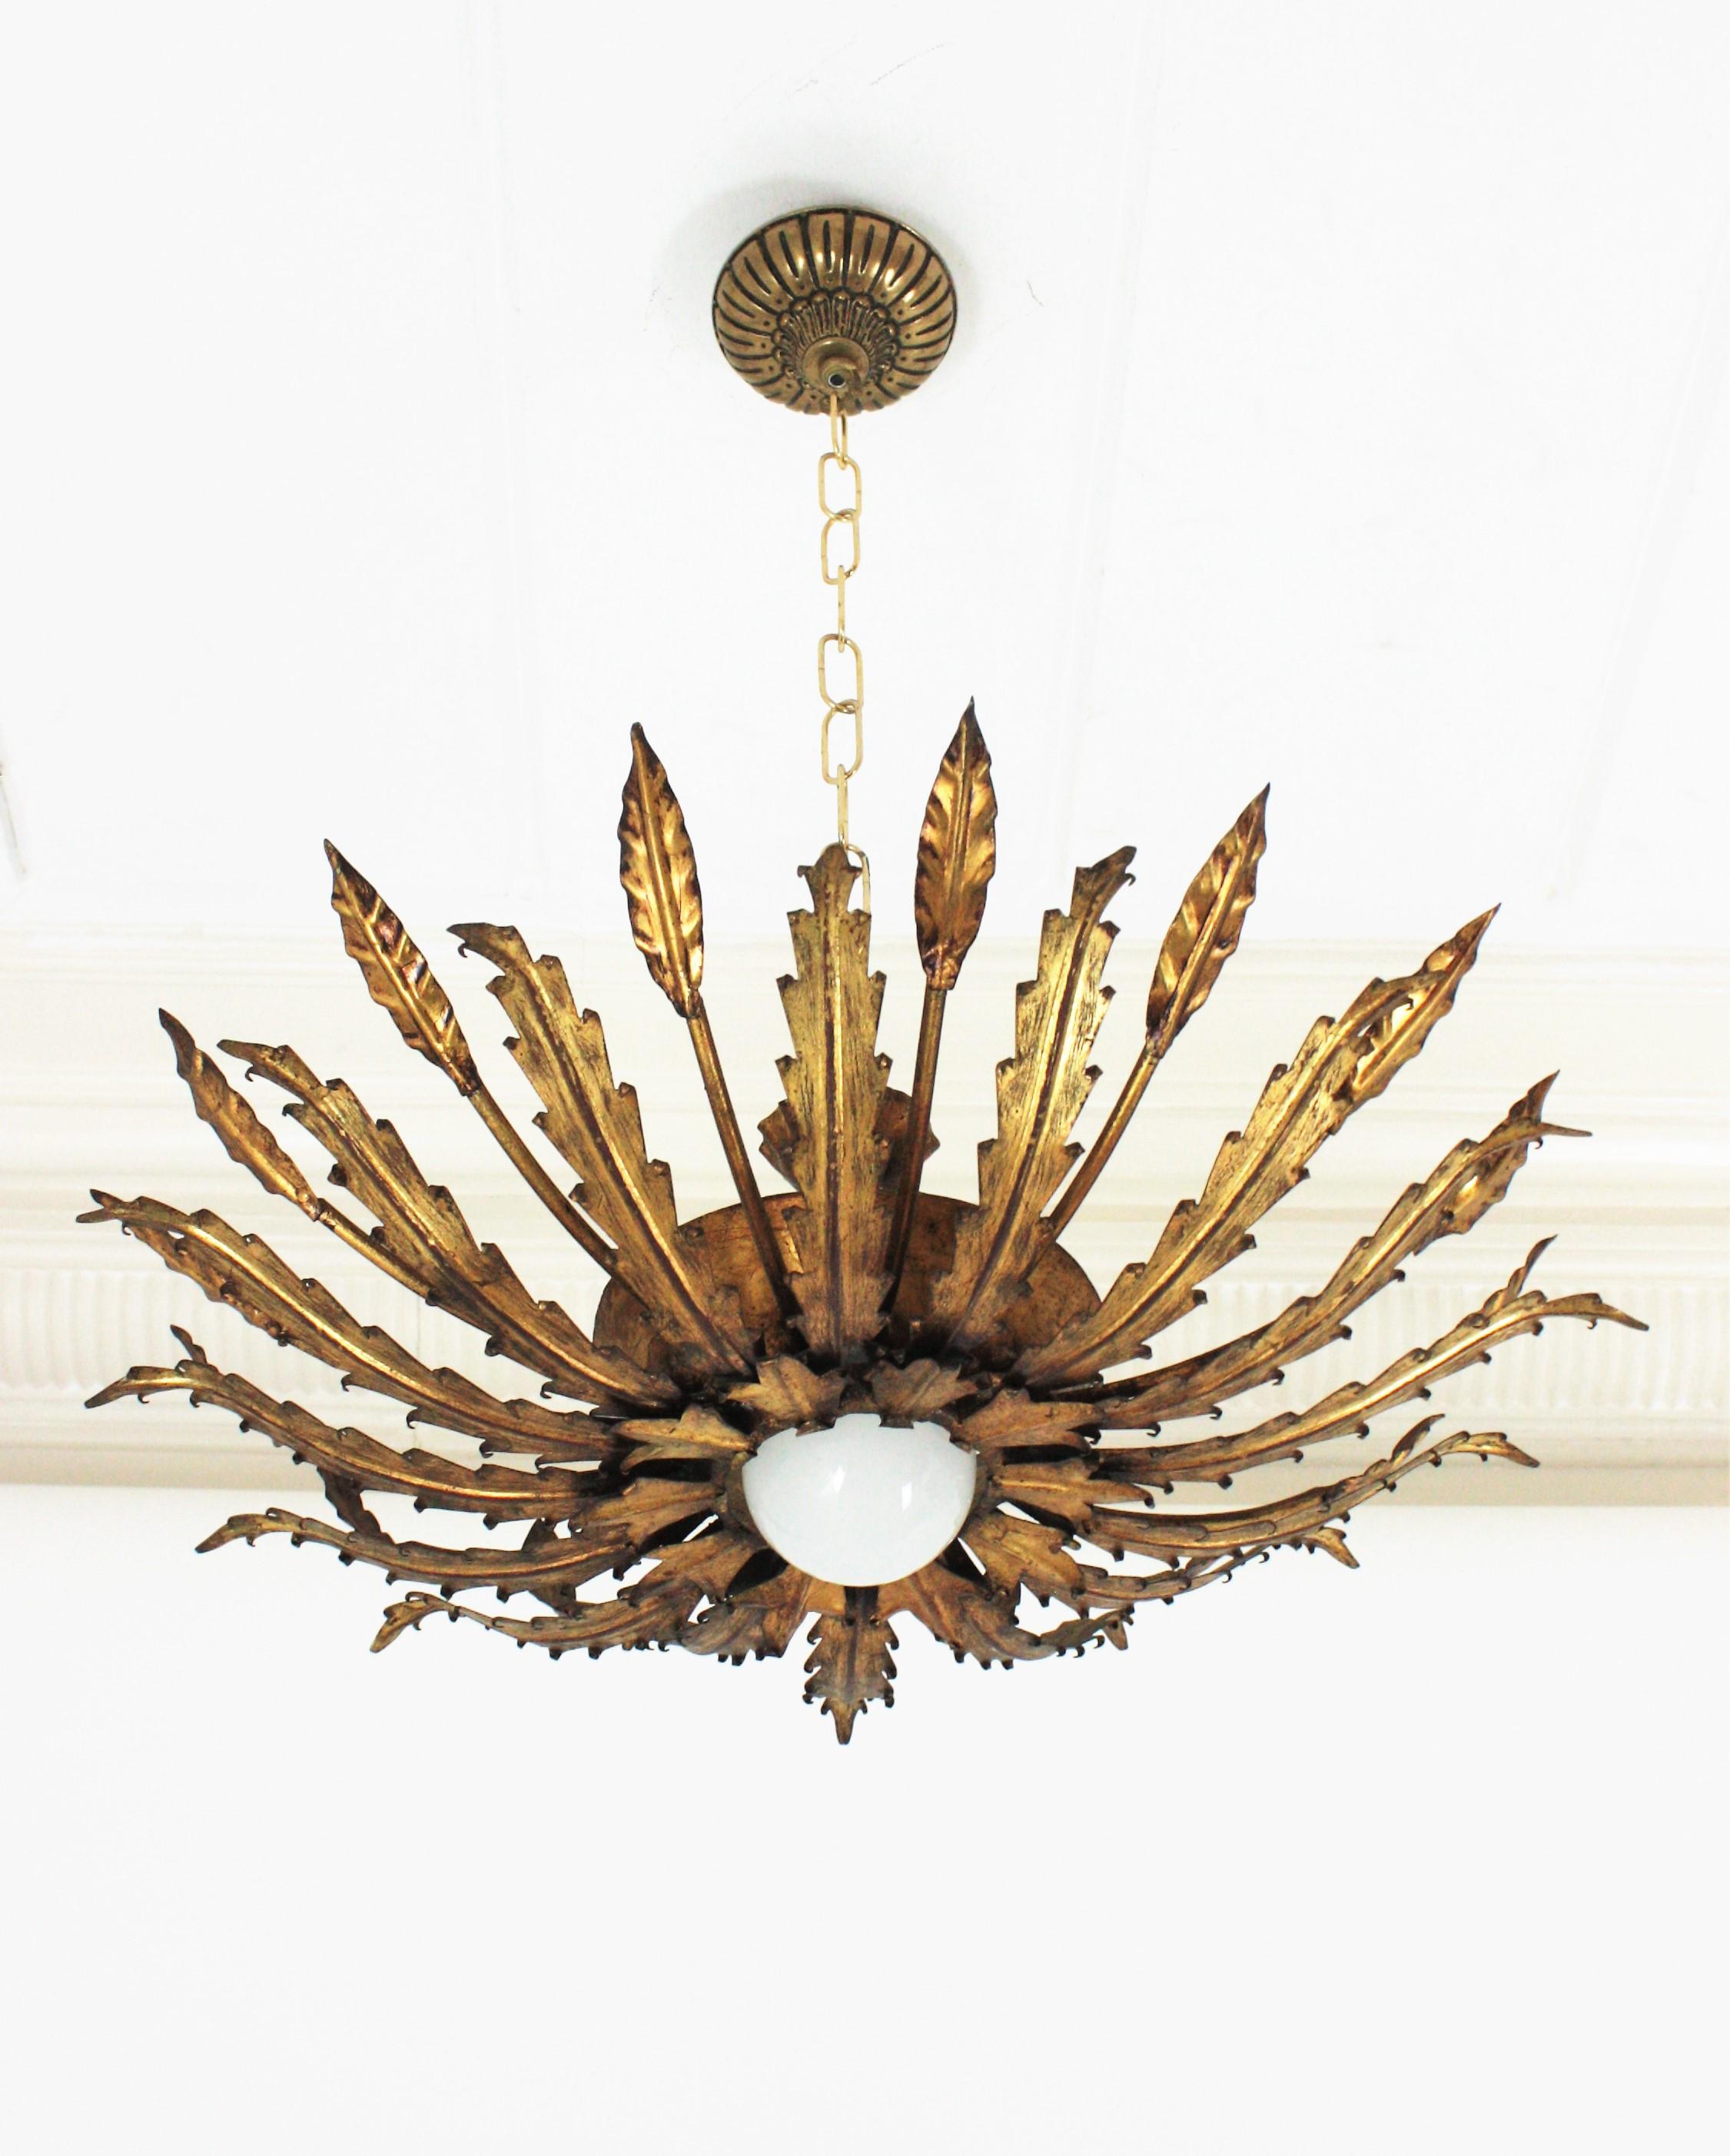 Hand-Crafted French Sunburst Light Fixture with Leaves Design, Gilt Iron